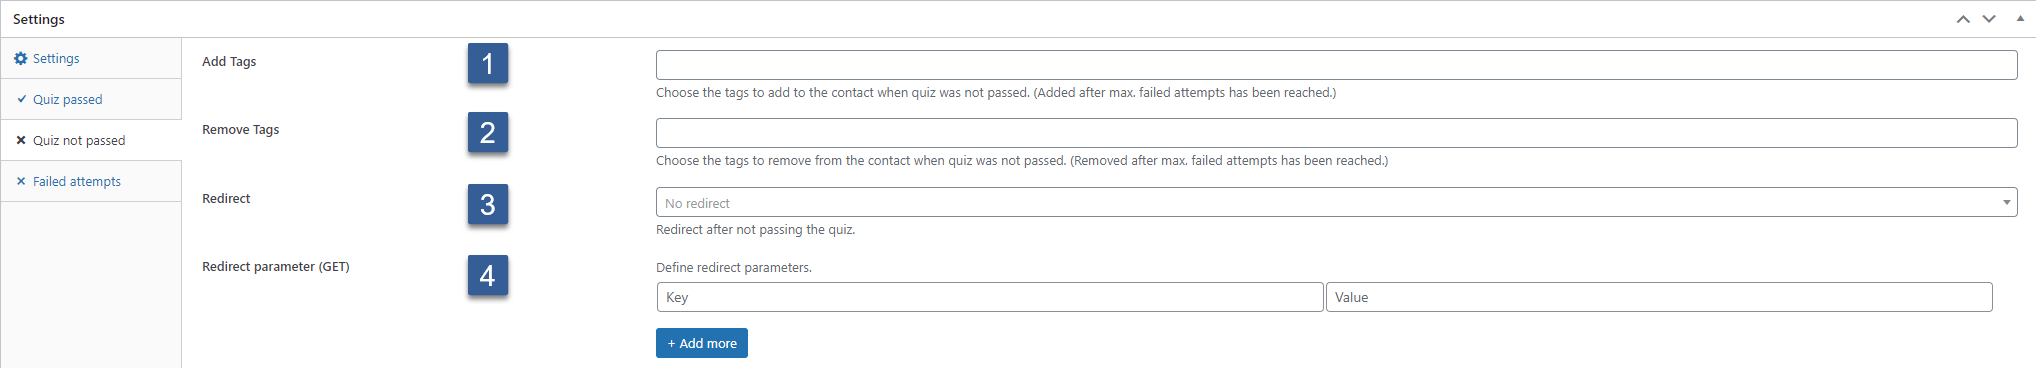 How to create a quiz - Quiz not passed settings